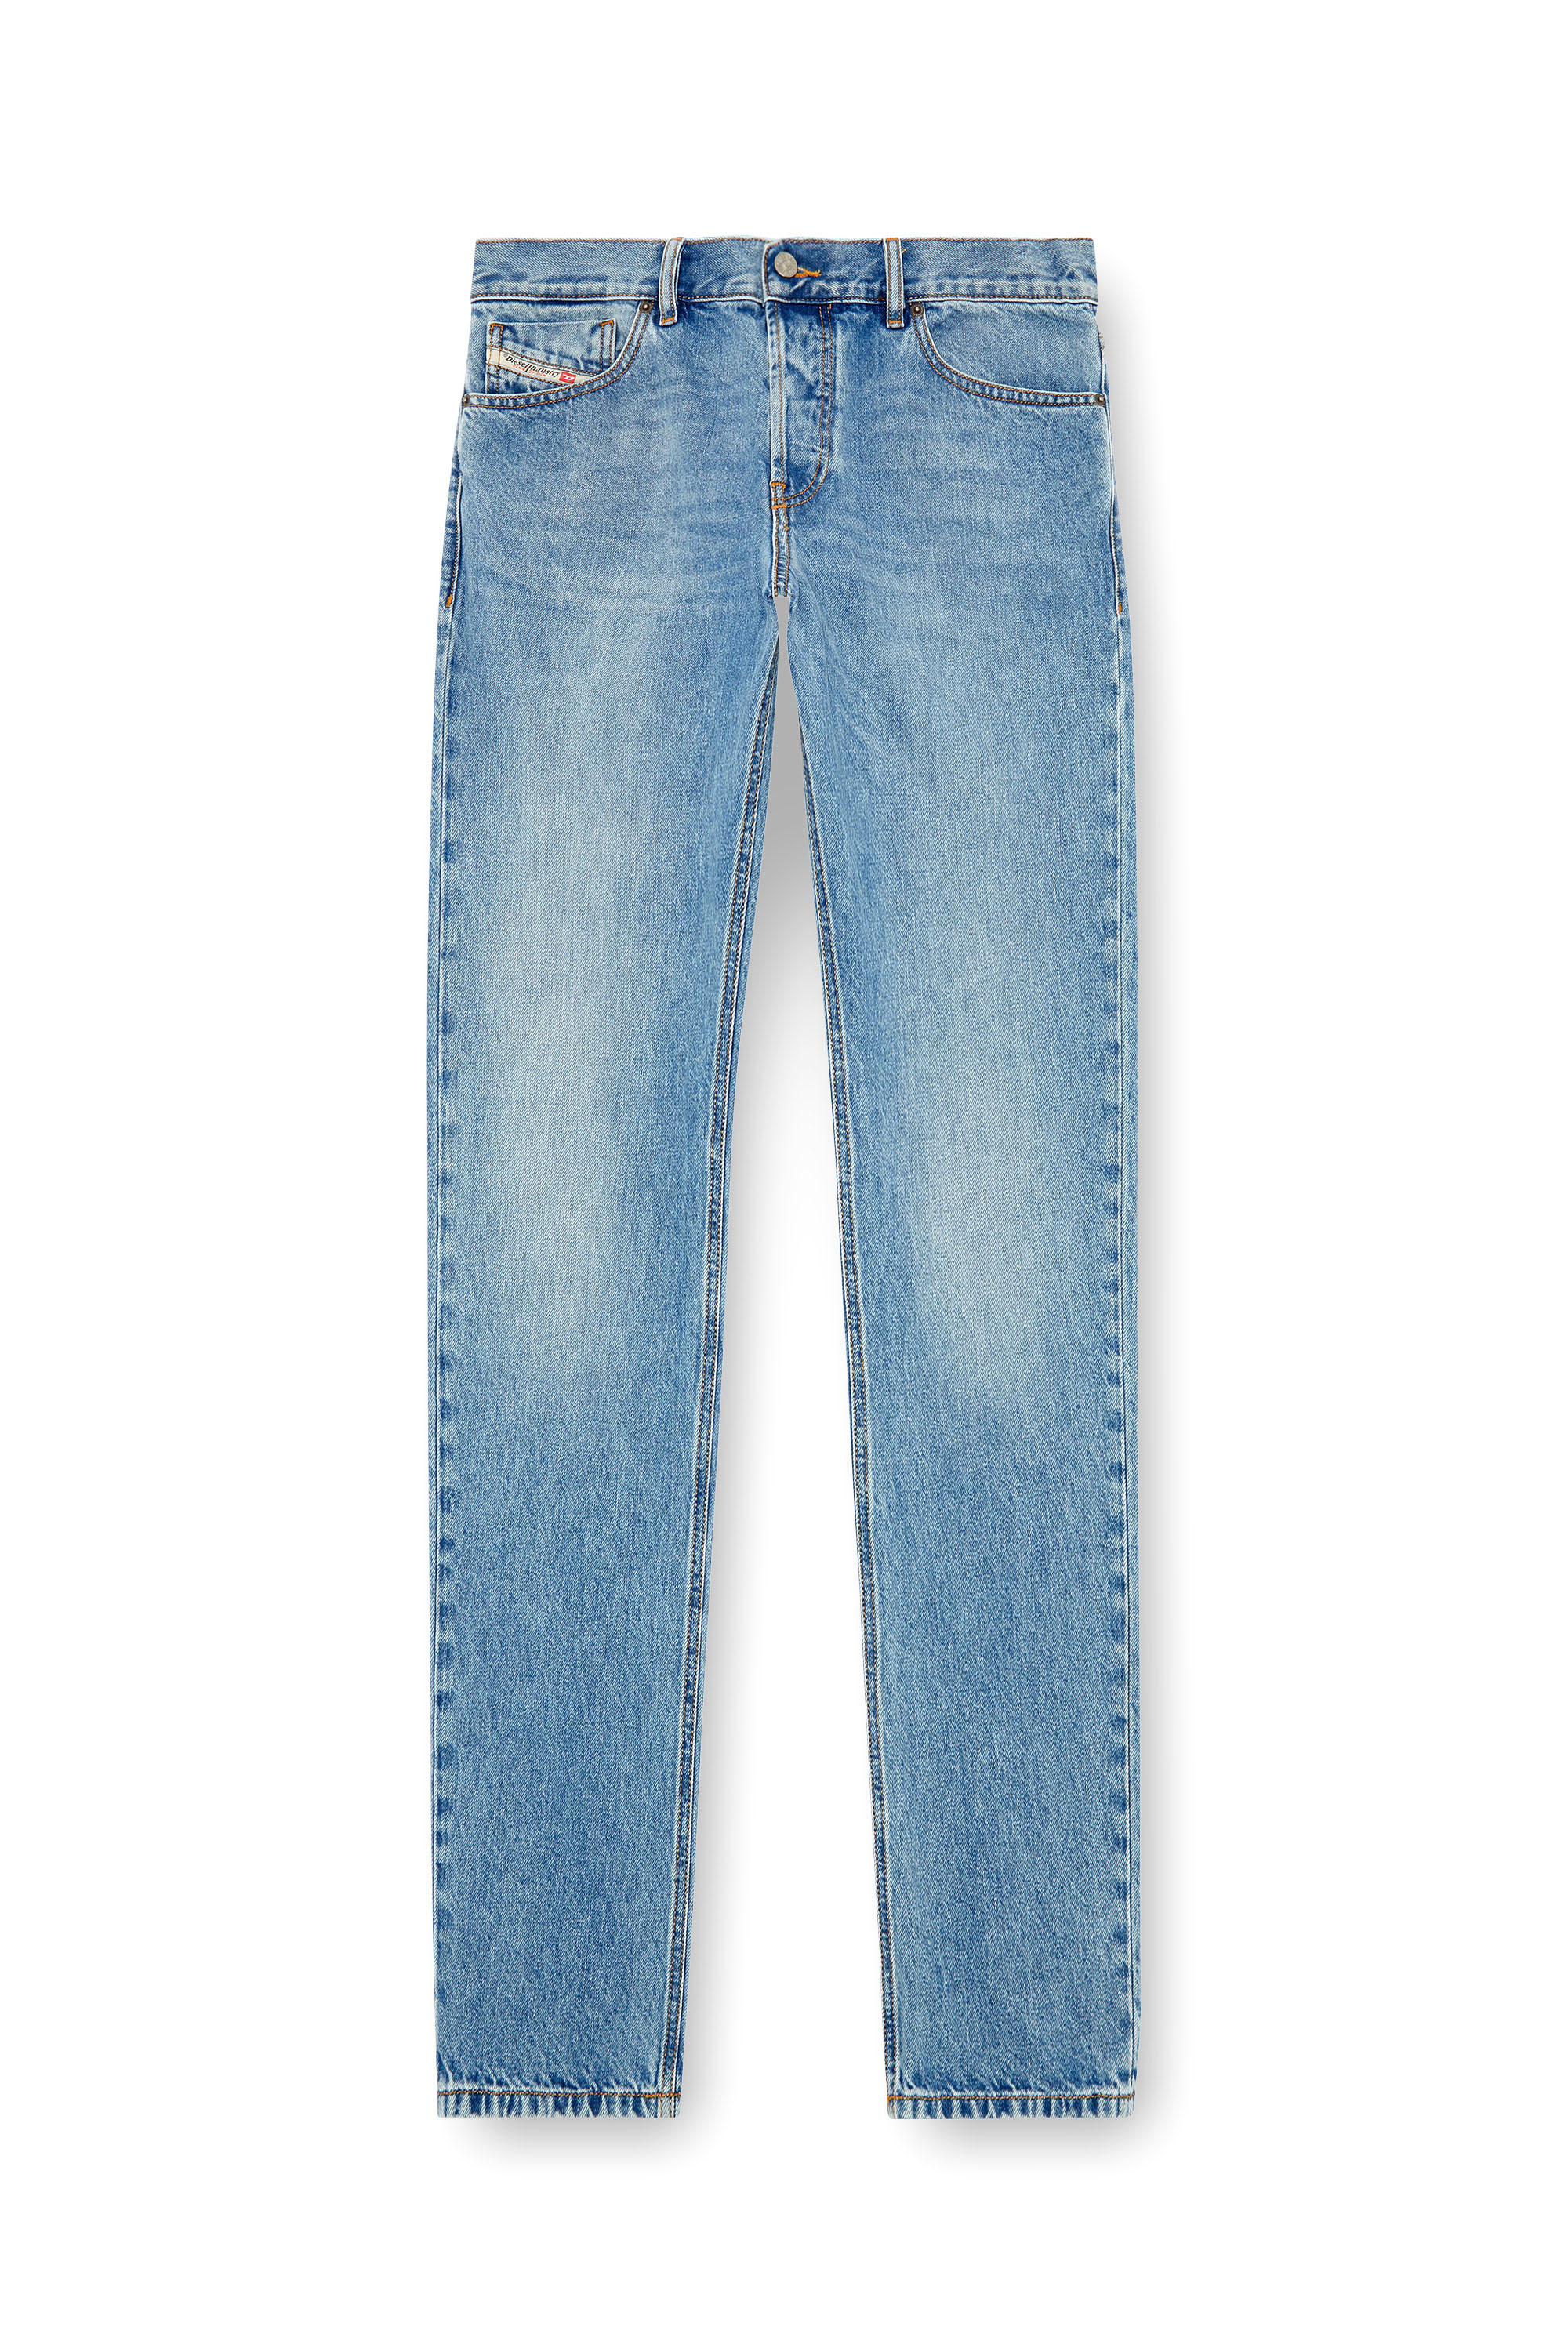 Diesel - Straight Jeans 1995 D-Sark 09I29, Hombre Straight Jeans - 1995 D-Sark in Azul marino - Image 5